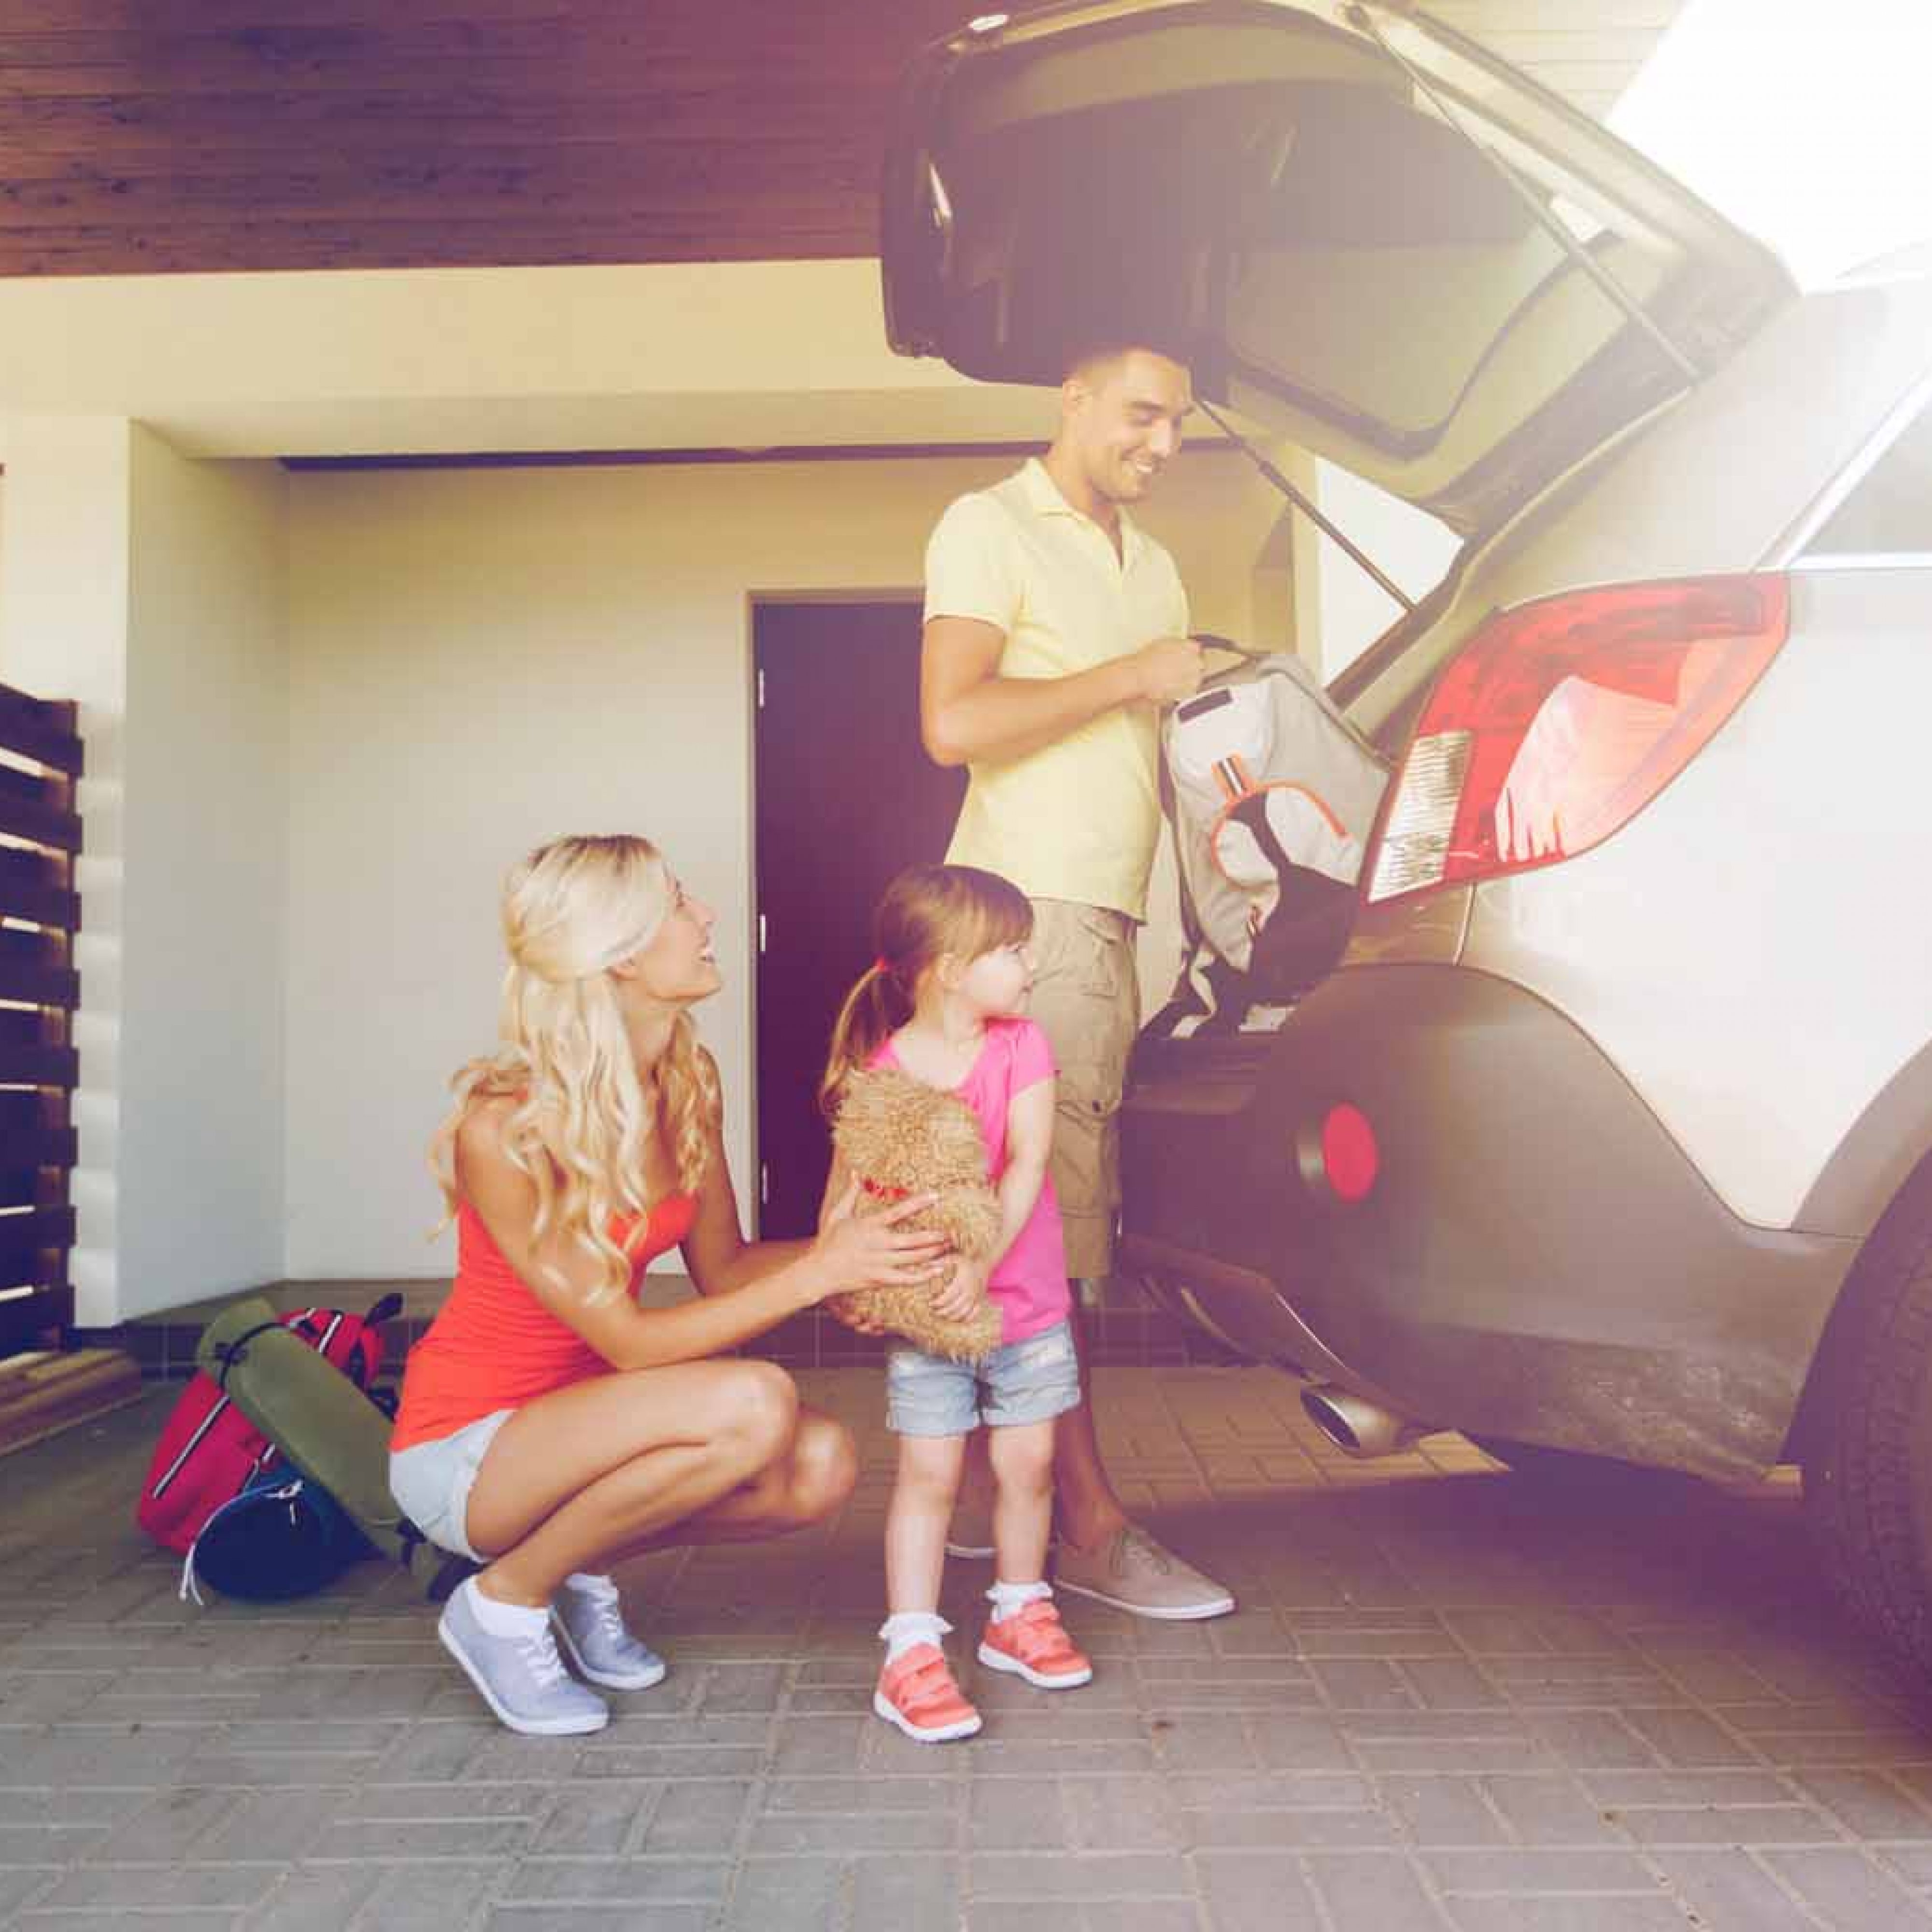 10 Tips for How to Enjoy a Road Trip With Kids